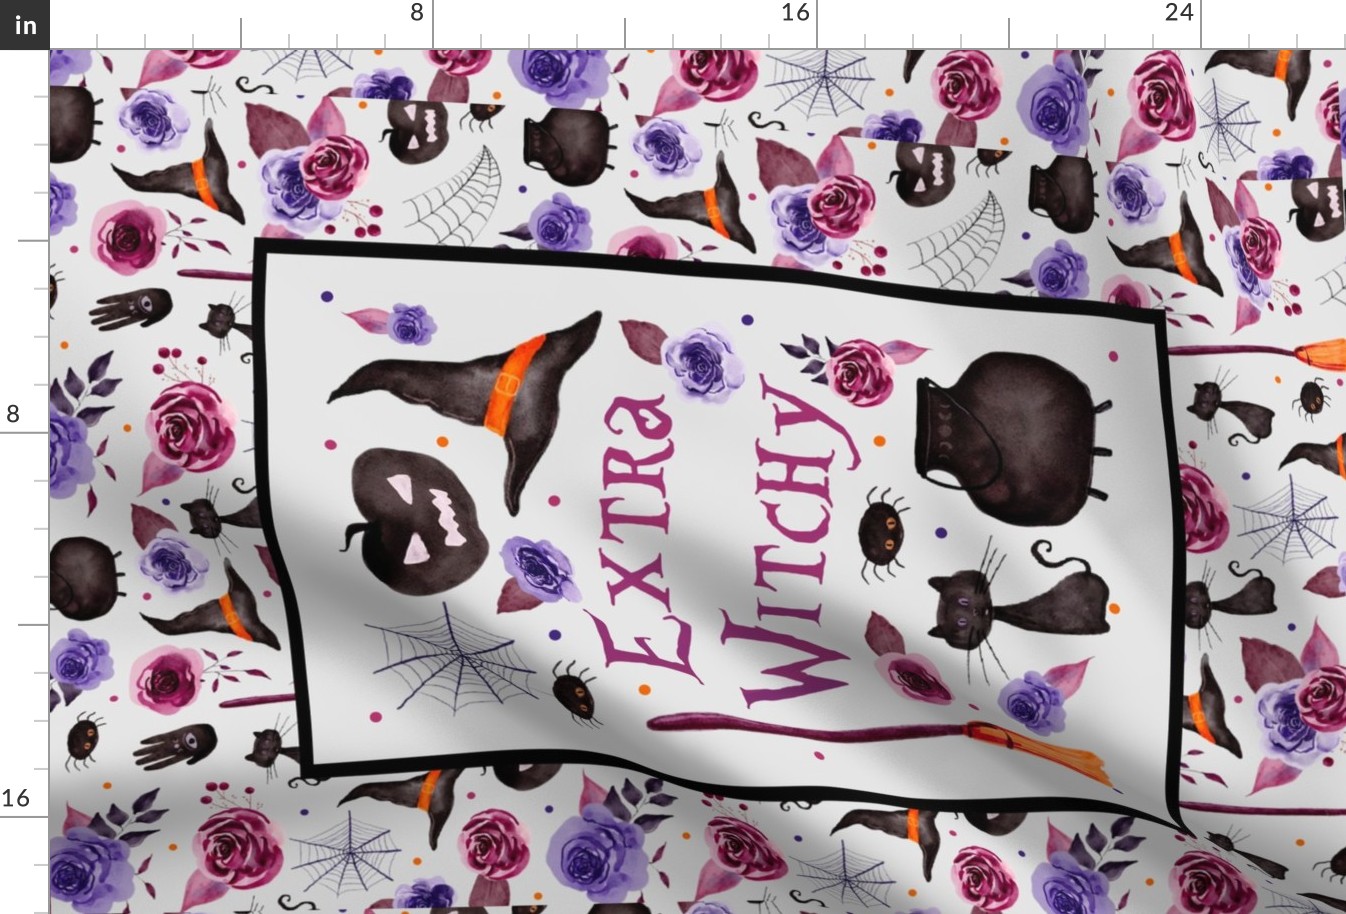 Fat Quarter Panel for Tea Towel or Wall Art Hanging Extra Witchy Sarcastic Halloween Black Cats Cauldrons Spiders with Roses